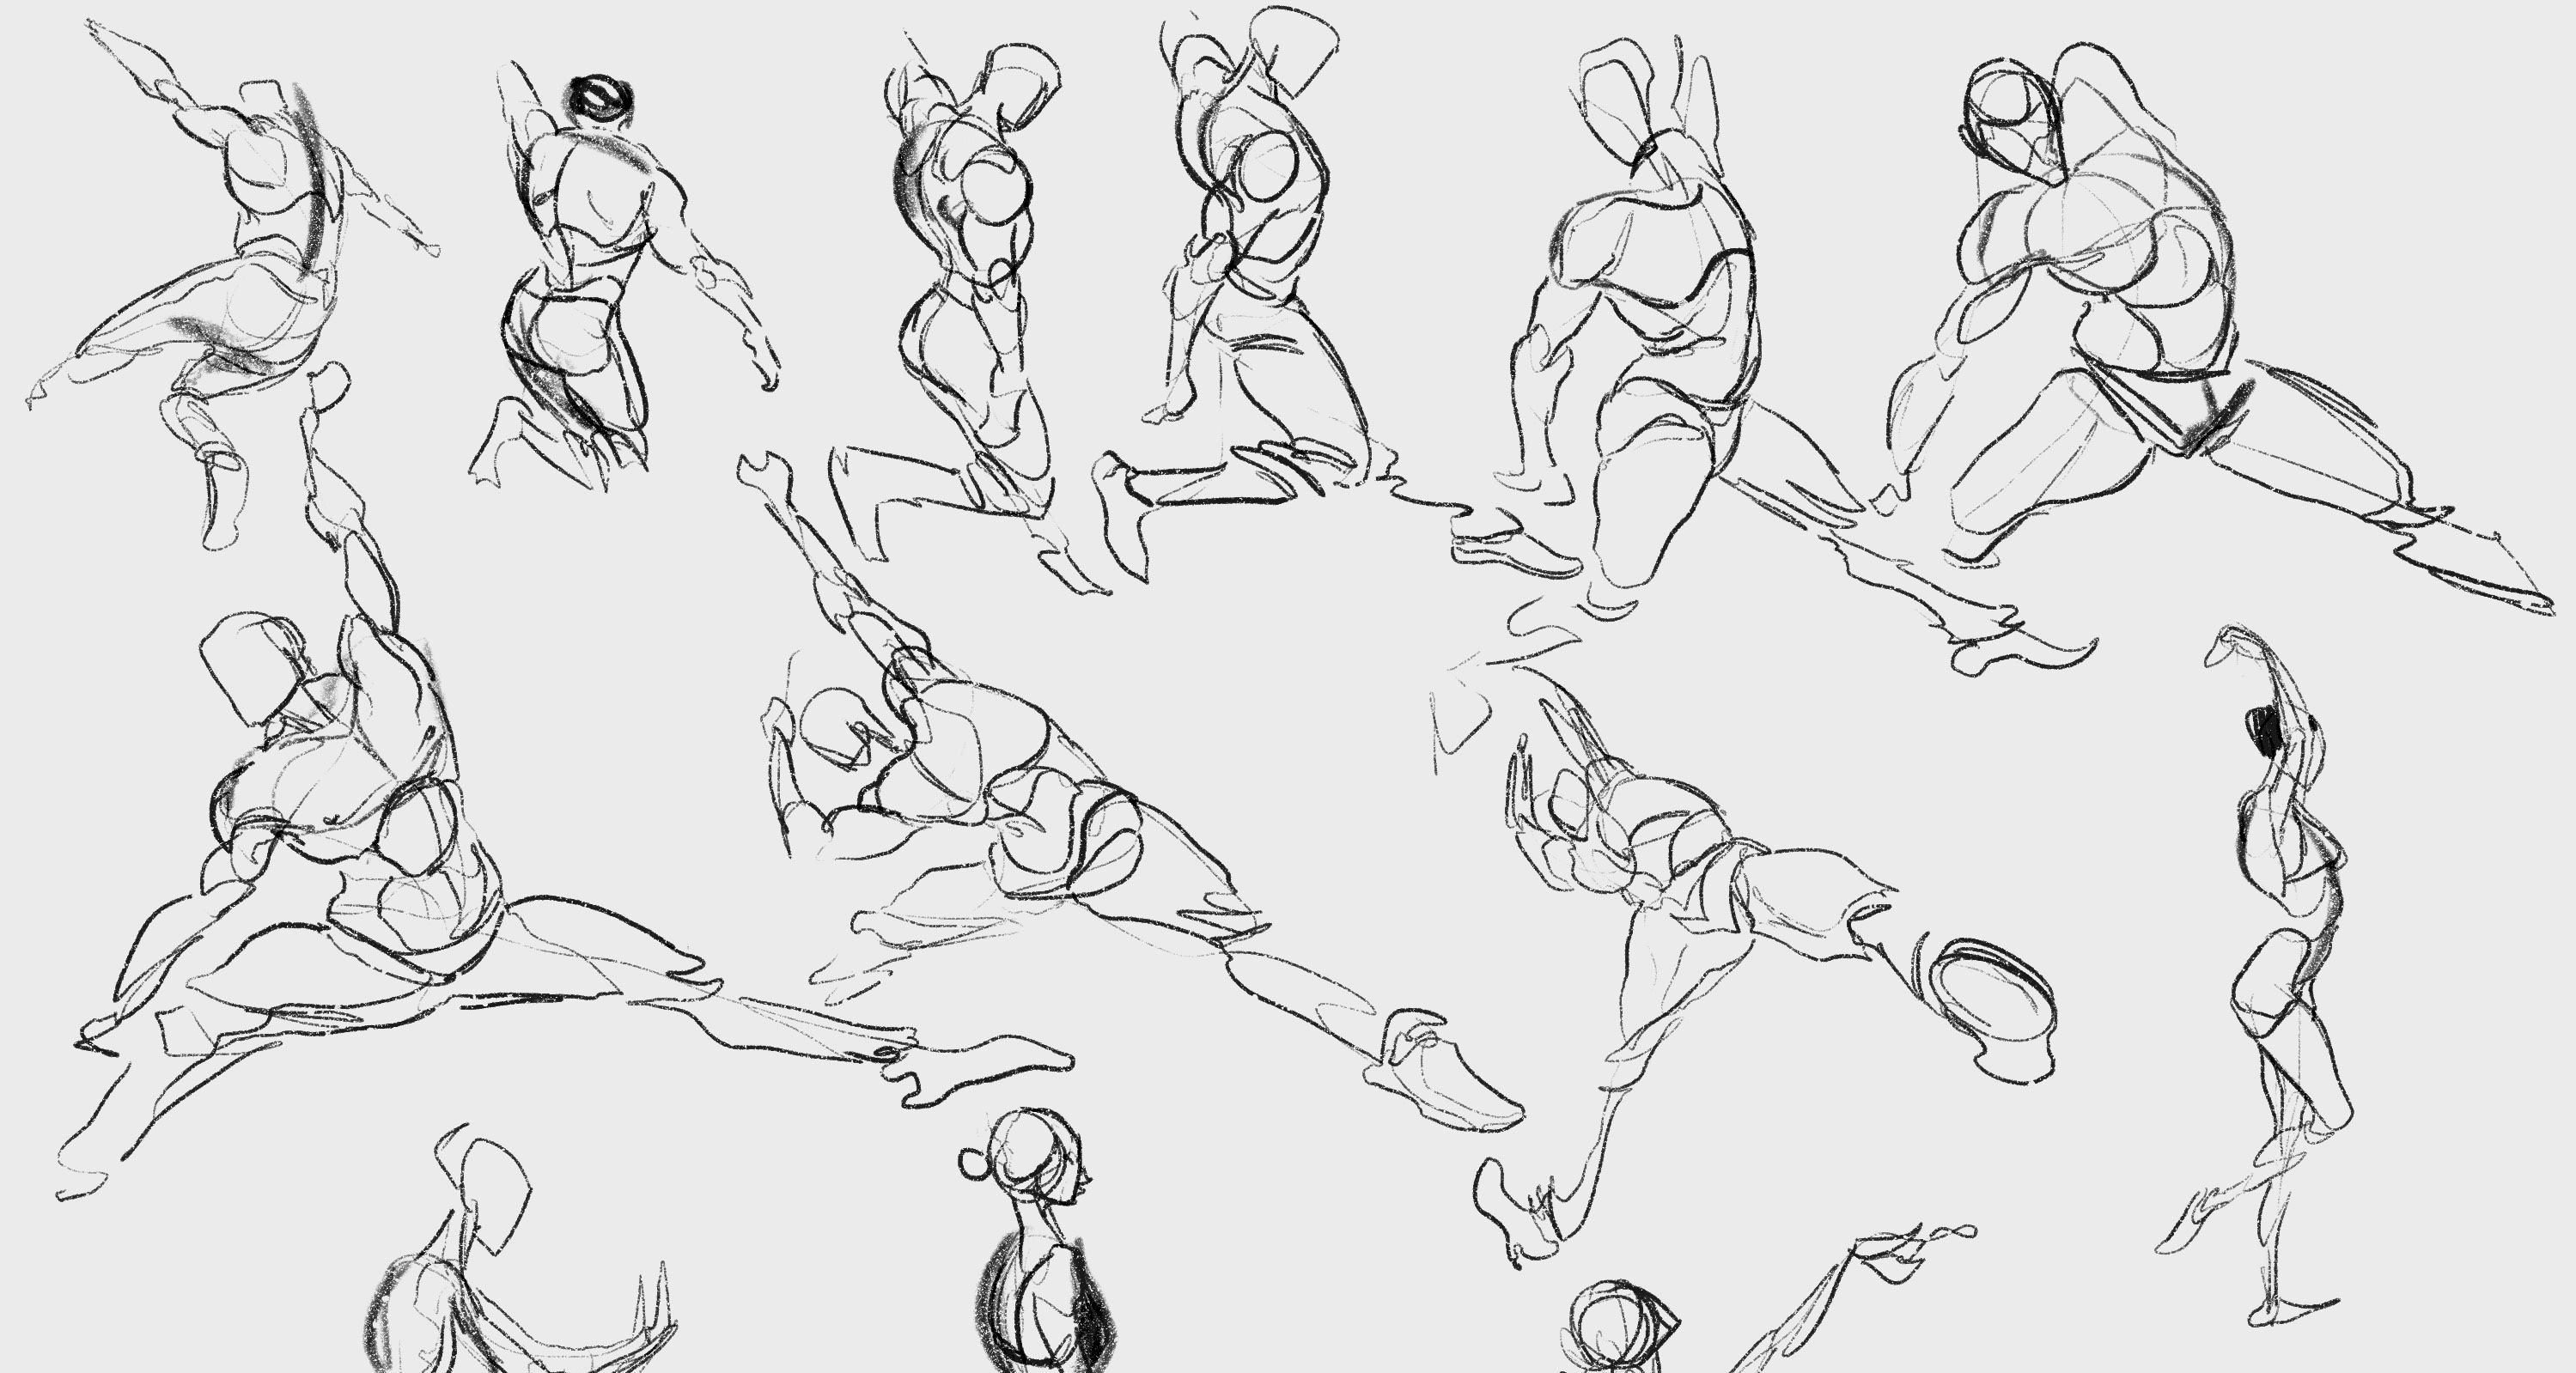 Masters Of Anatomy | Are you an artist looking to improve your dynamic poses?  We make anatomy and character design books with famous artists. Take a look  at ... | Instagram